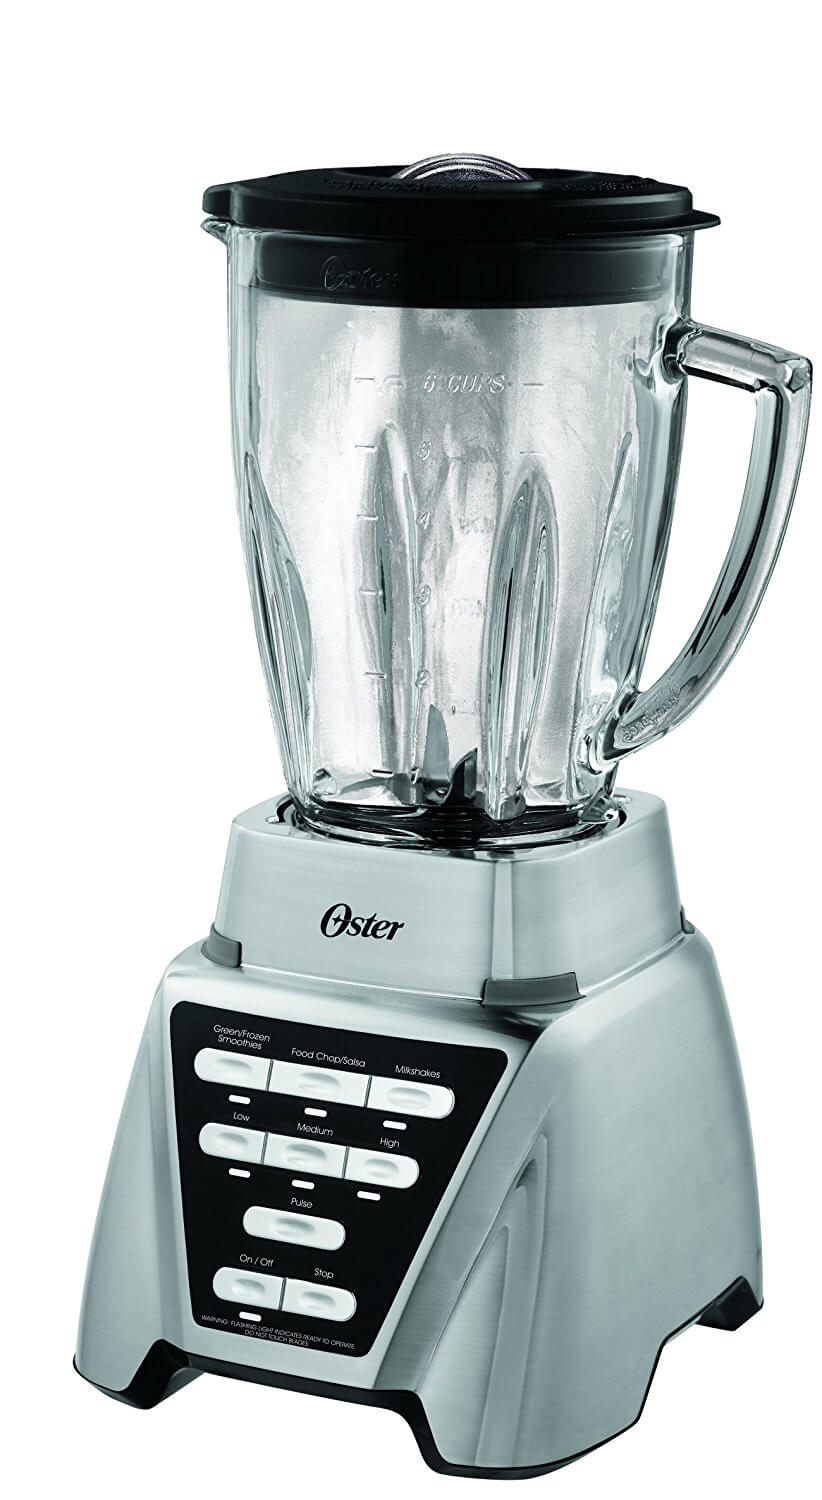 Why You Should Buy an Oster Pro Blender